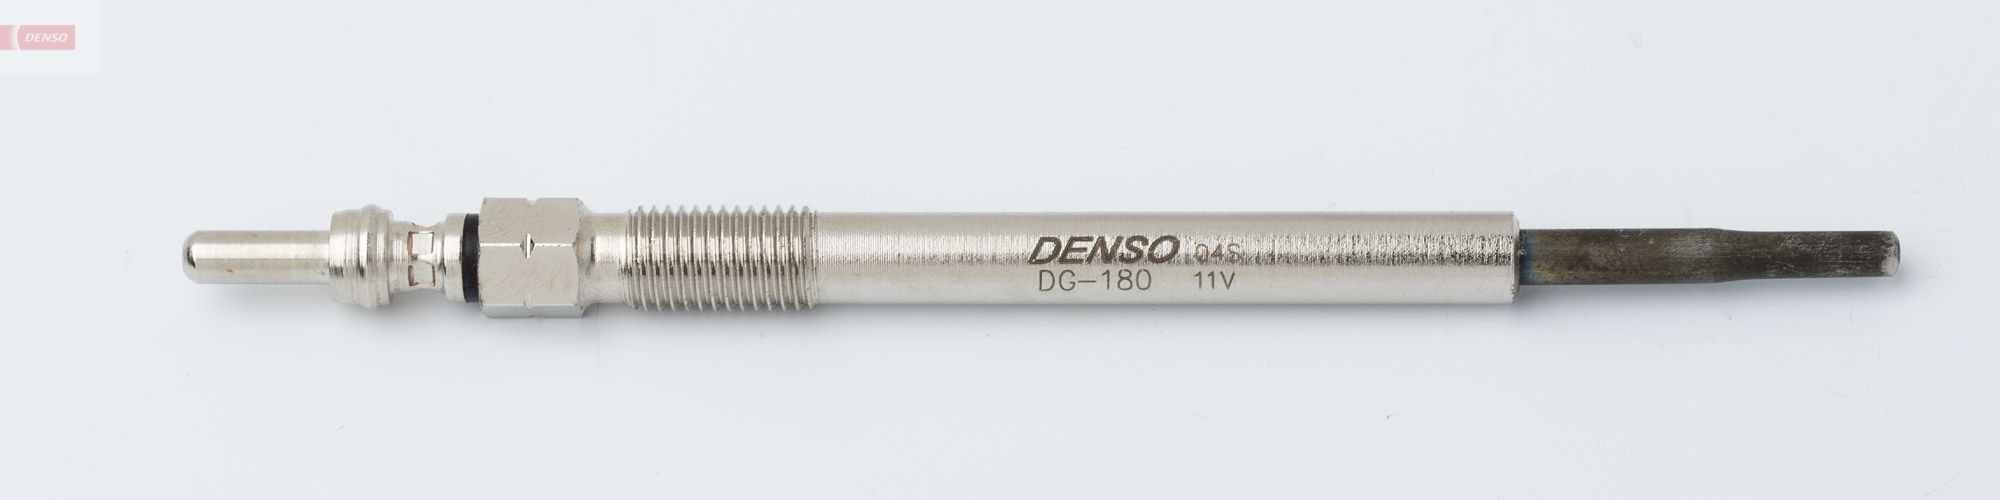 Great value for money - DENSO Glow plug DG-180